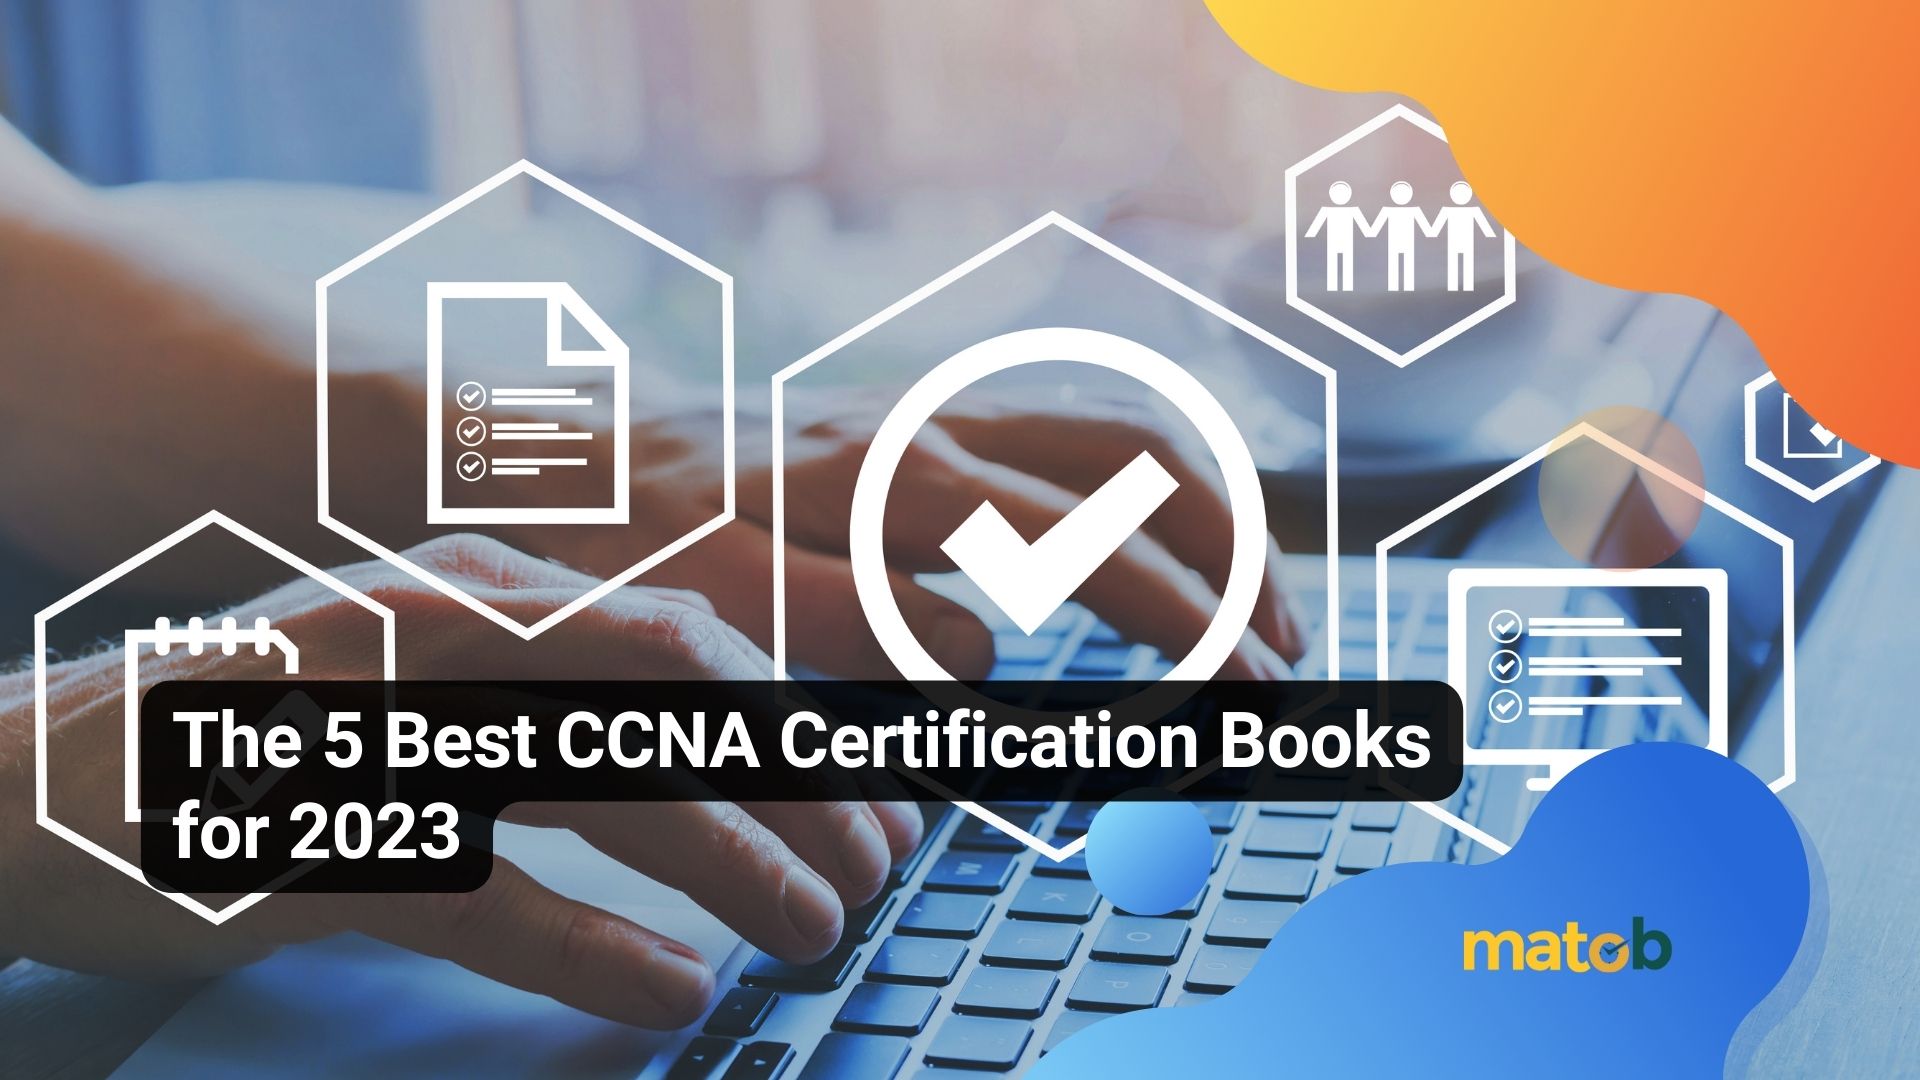 The 5 Best CCNA Certification Books for 2023